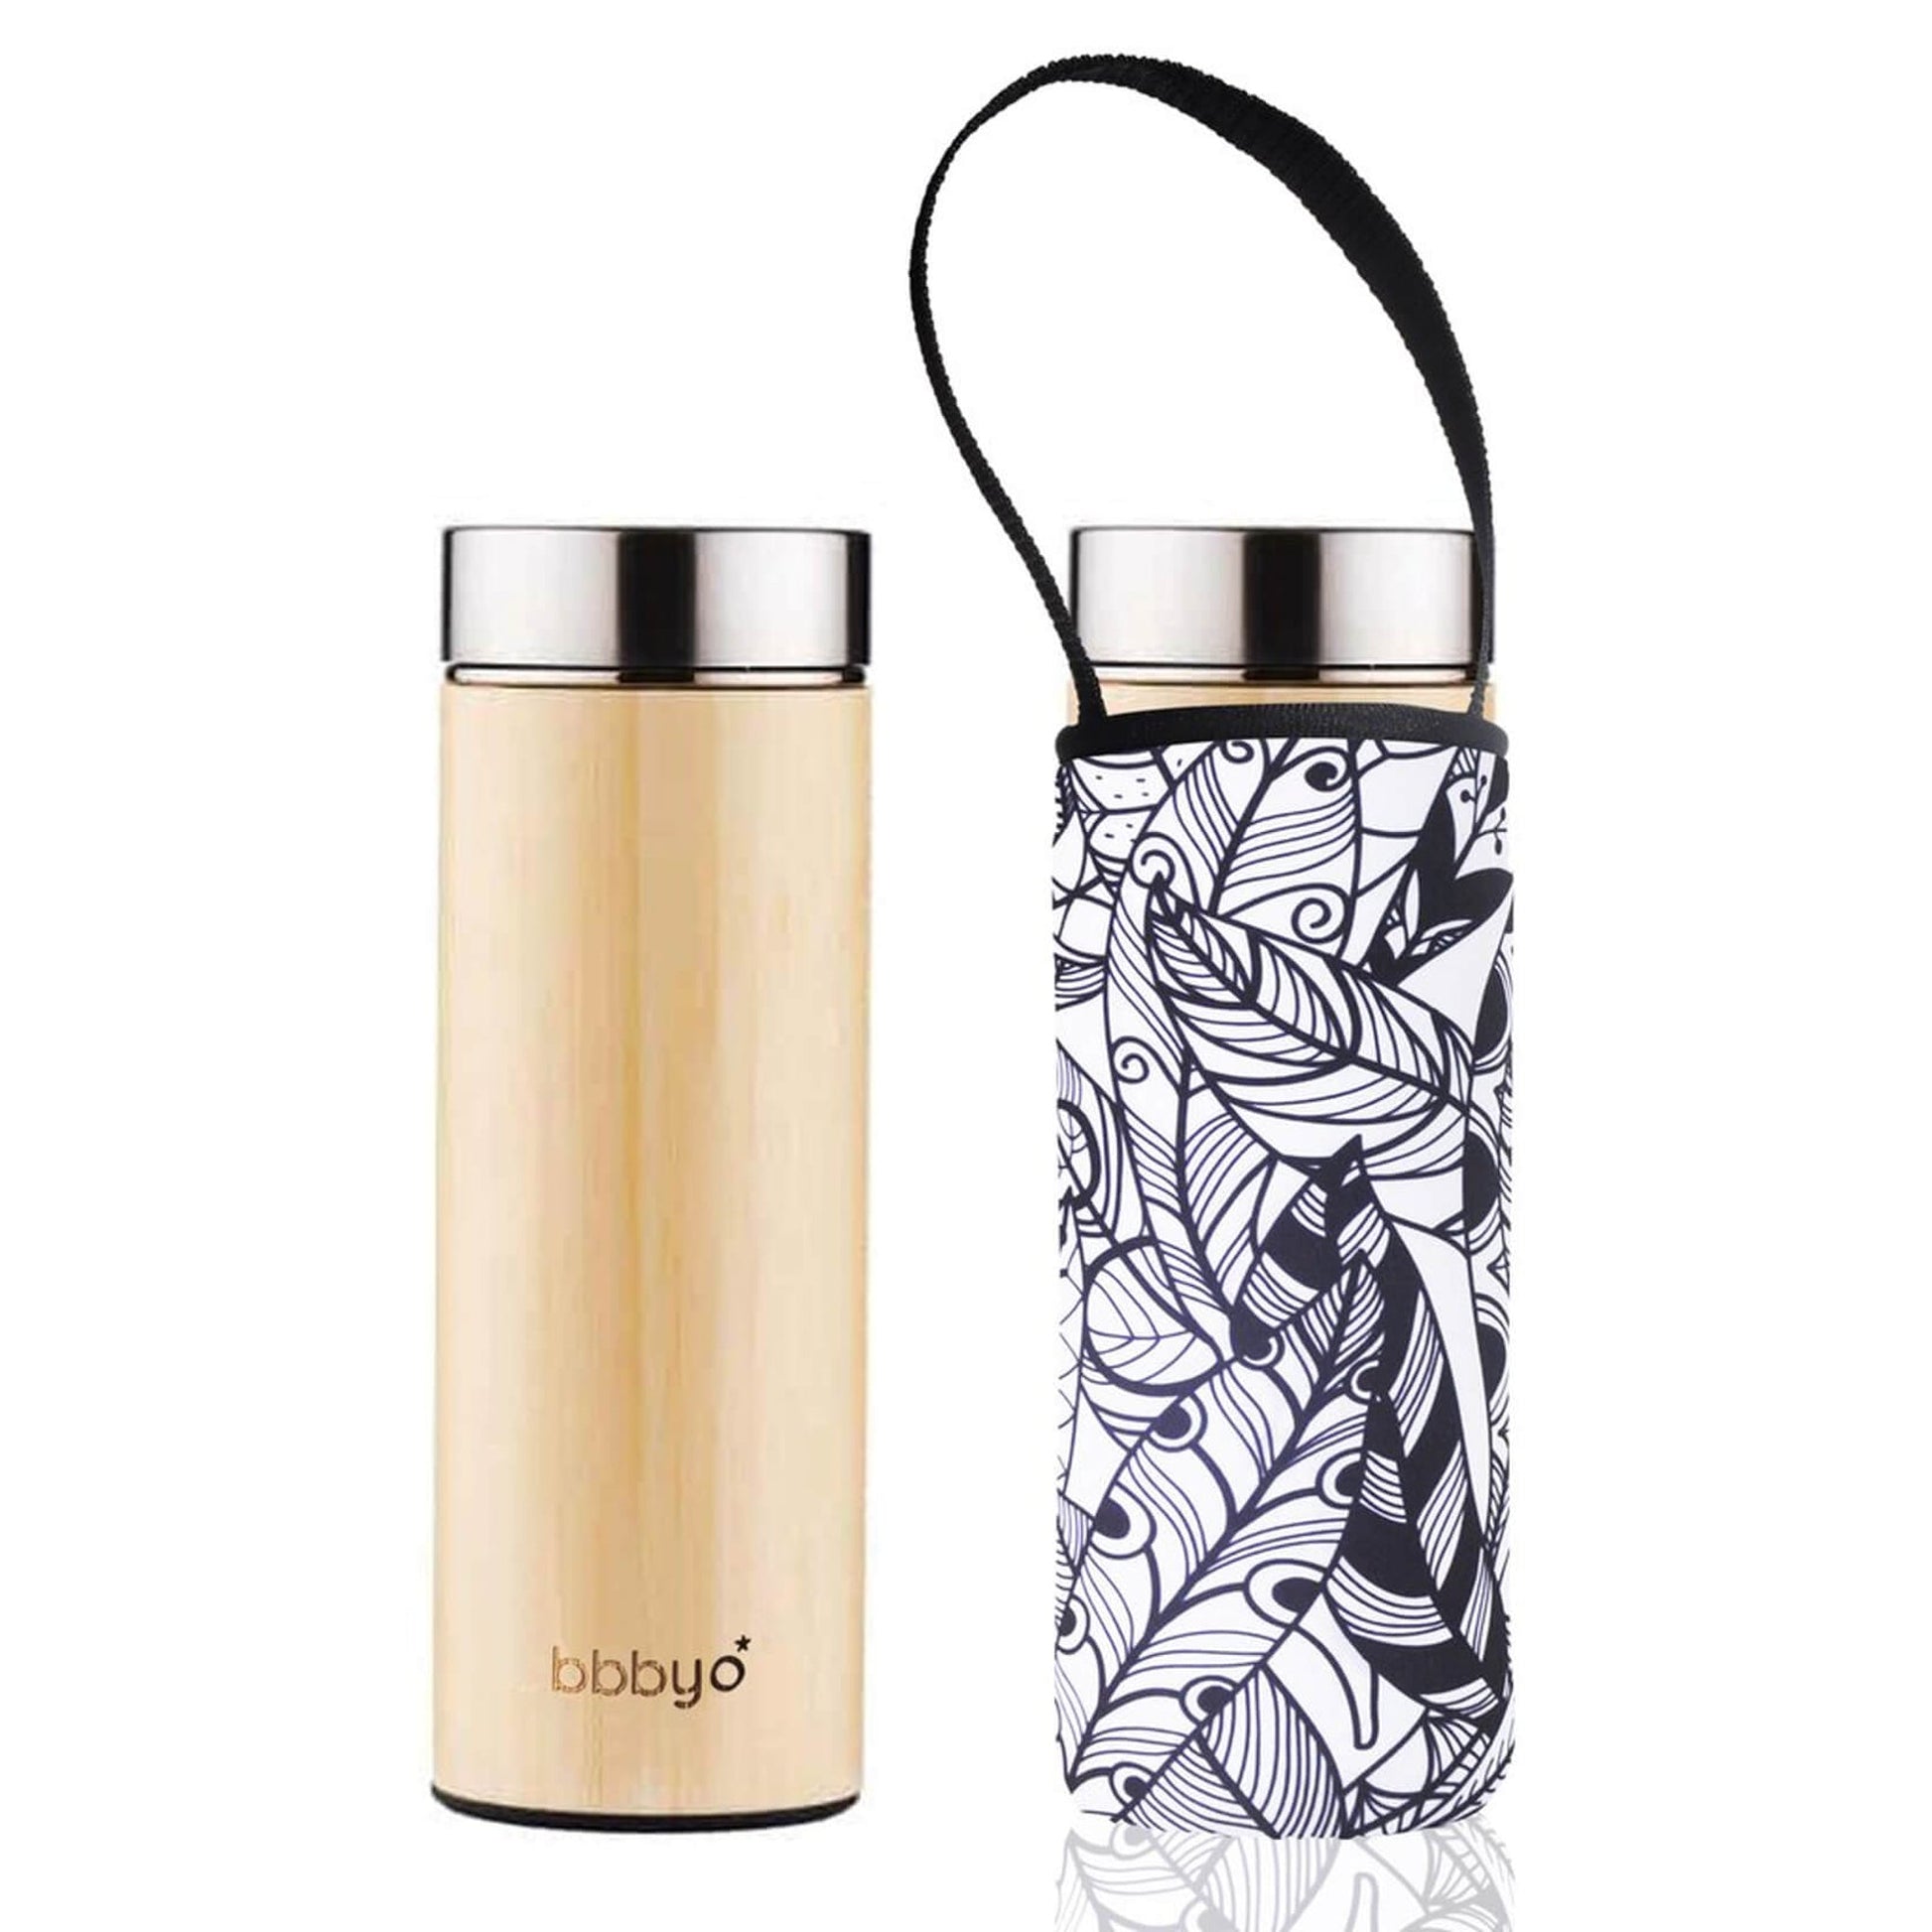 'SS + Bamboo' 17 oz Thermal Tea Flask and 'Feather' Carry Cover by BBBYO-BBBYO